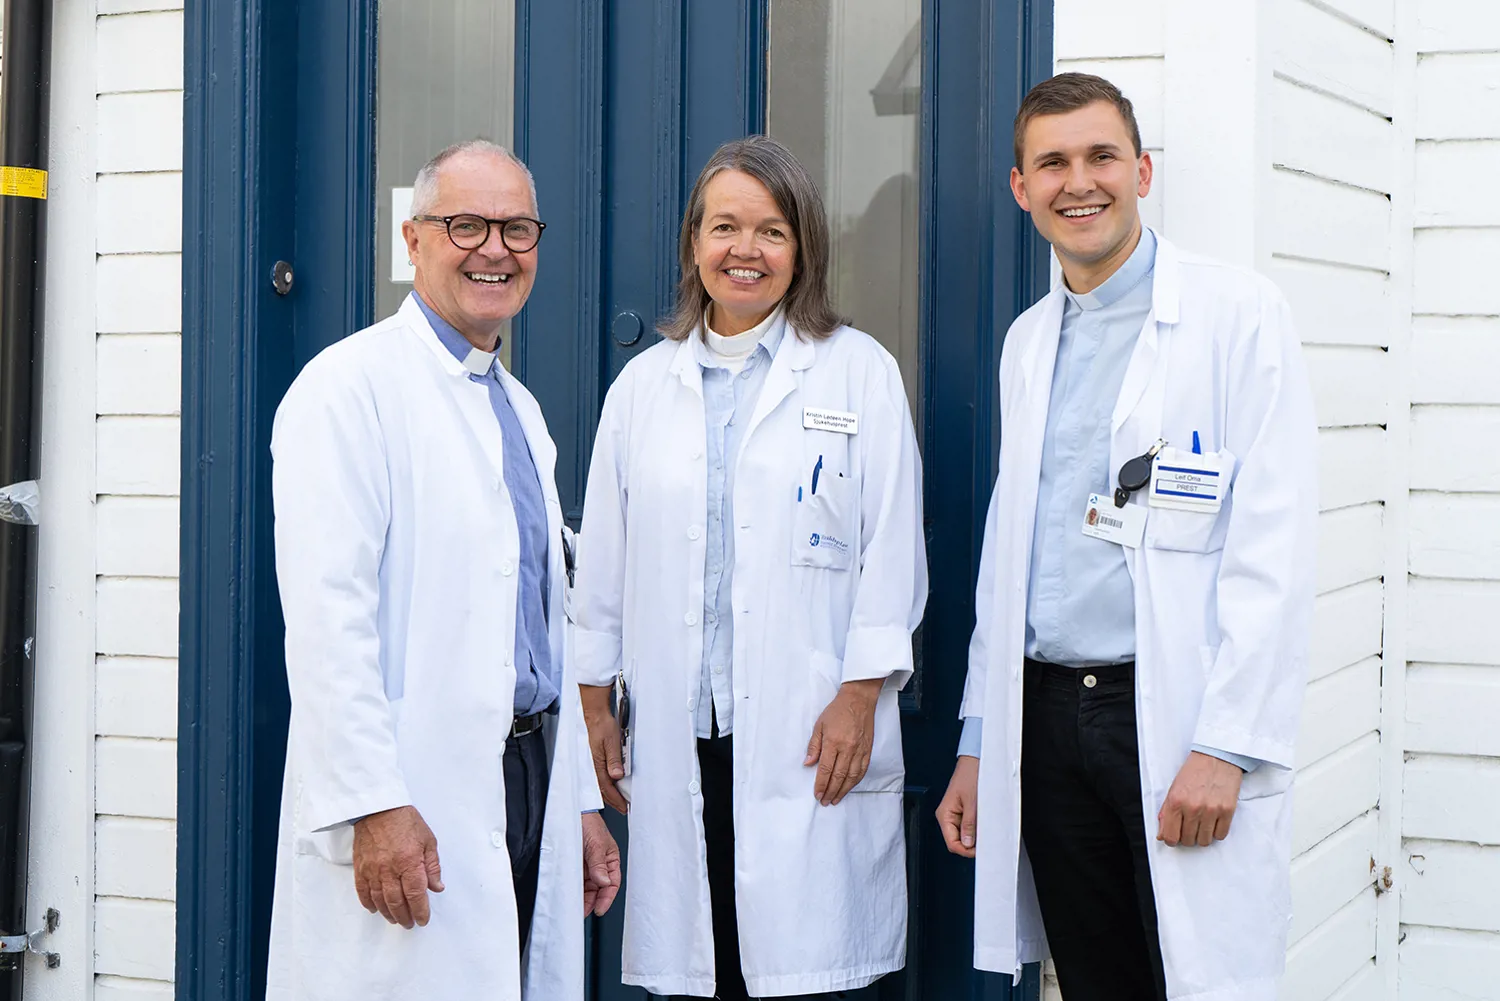 A group of people in white coats standing in front of a blue door